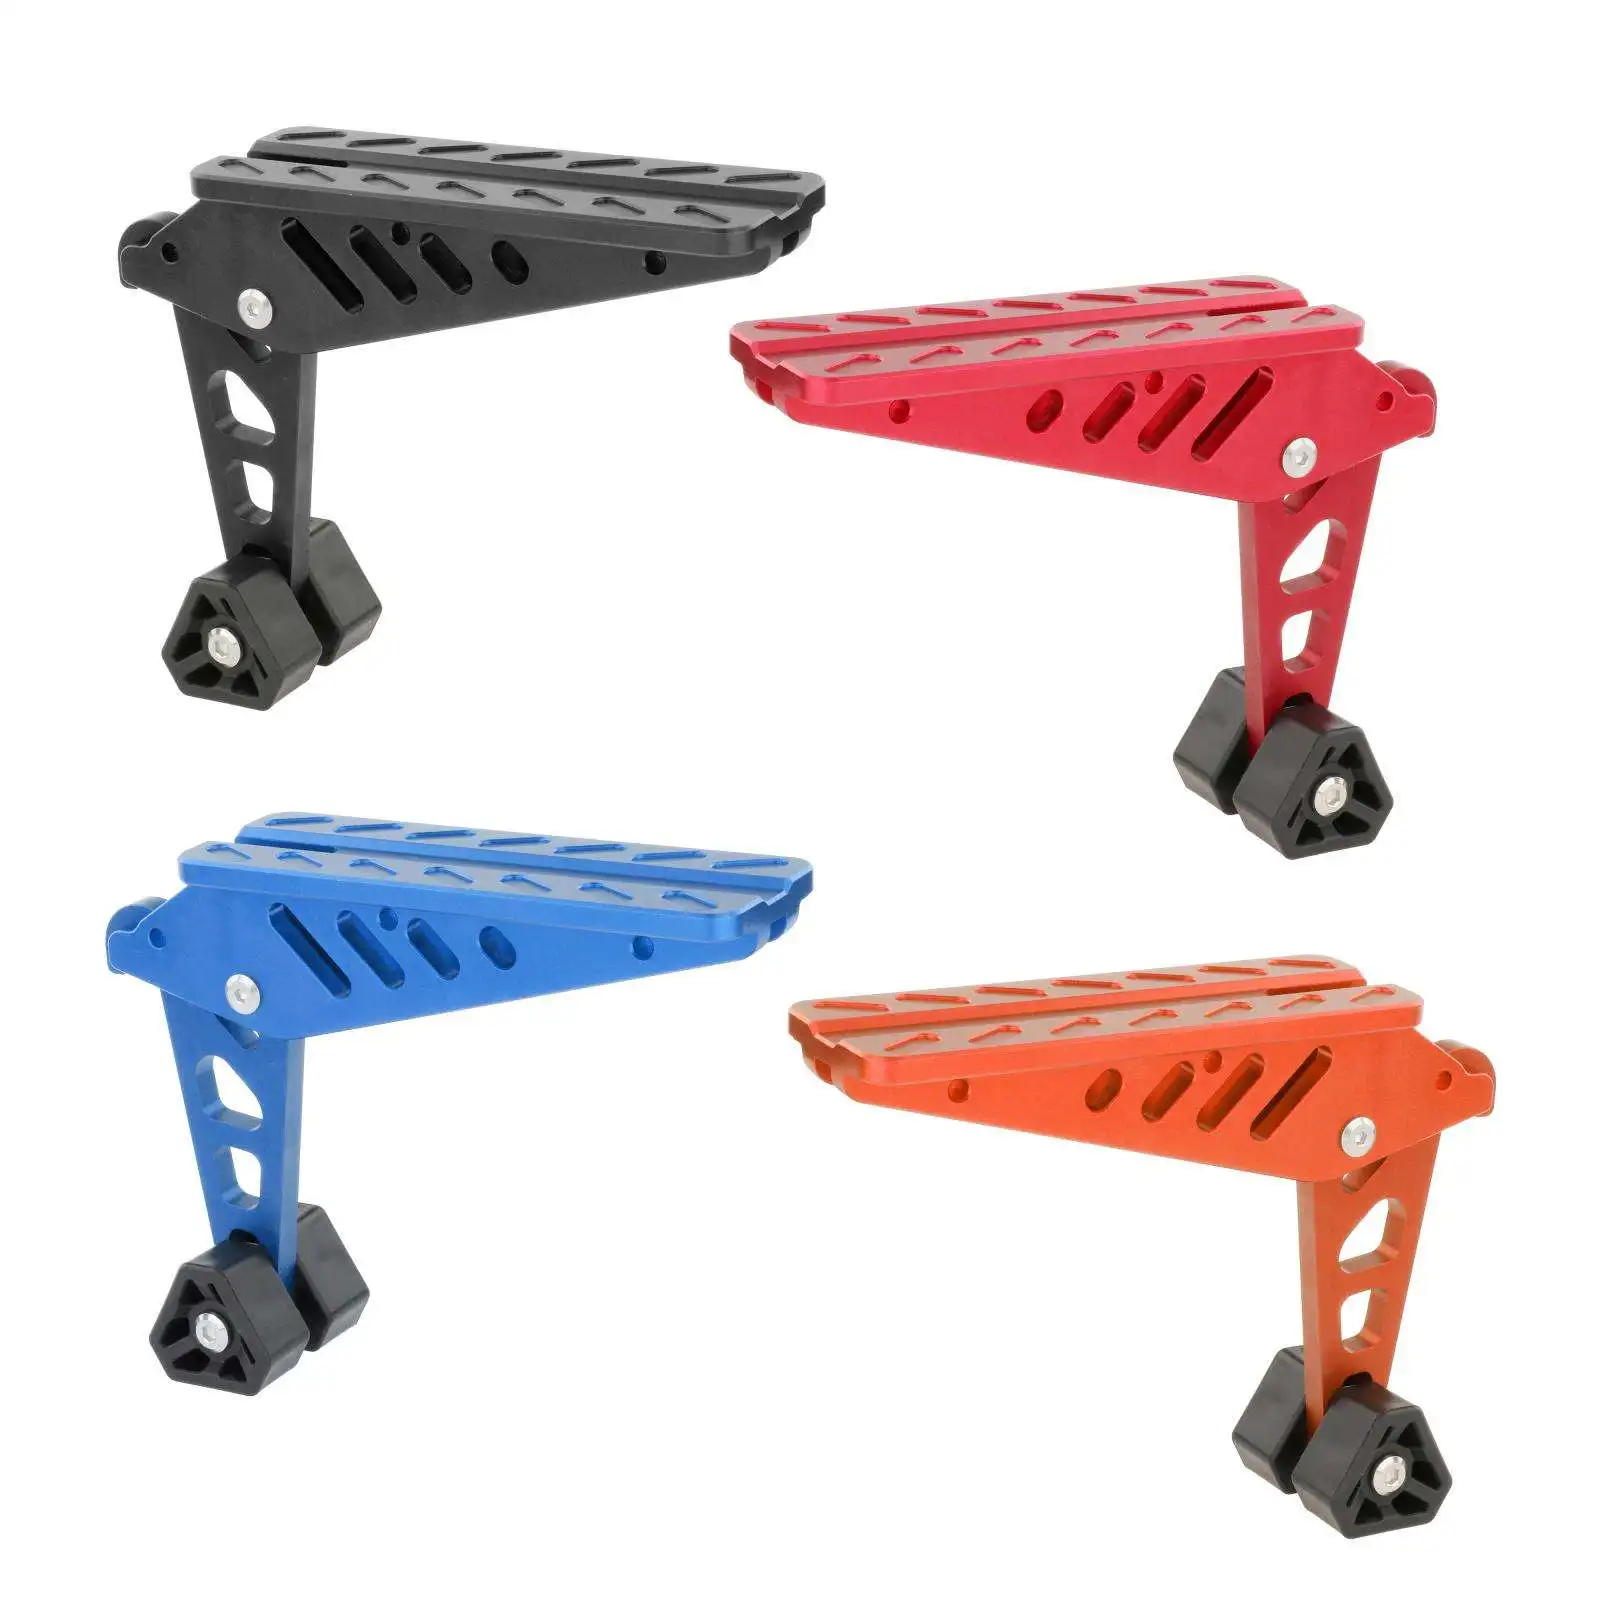 Car Door Step Exterior Unil Foldable Standing Pedal Pedal Ladder Fit for SUV Roof Rack Hiking